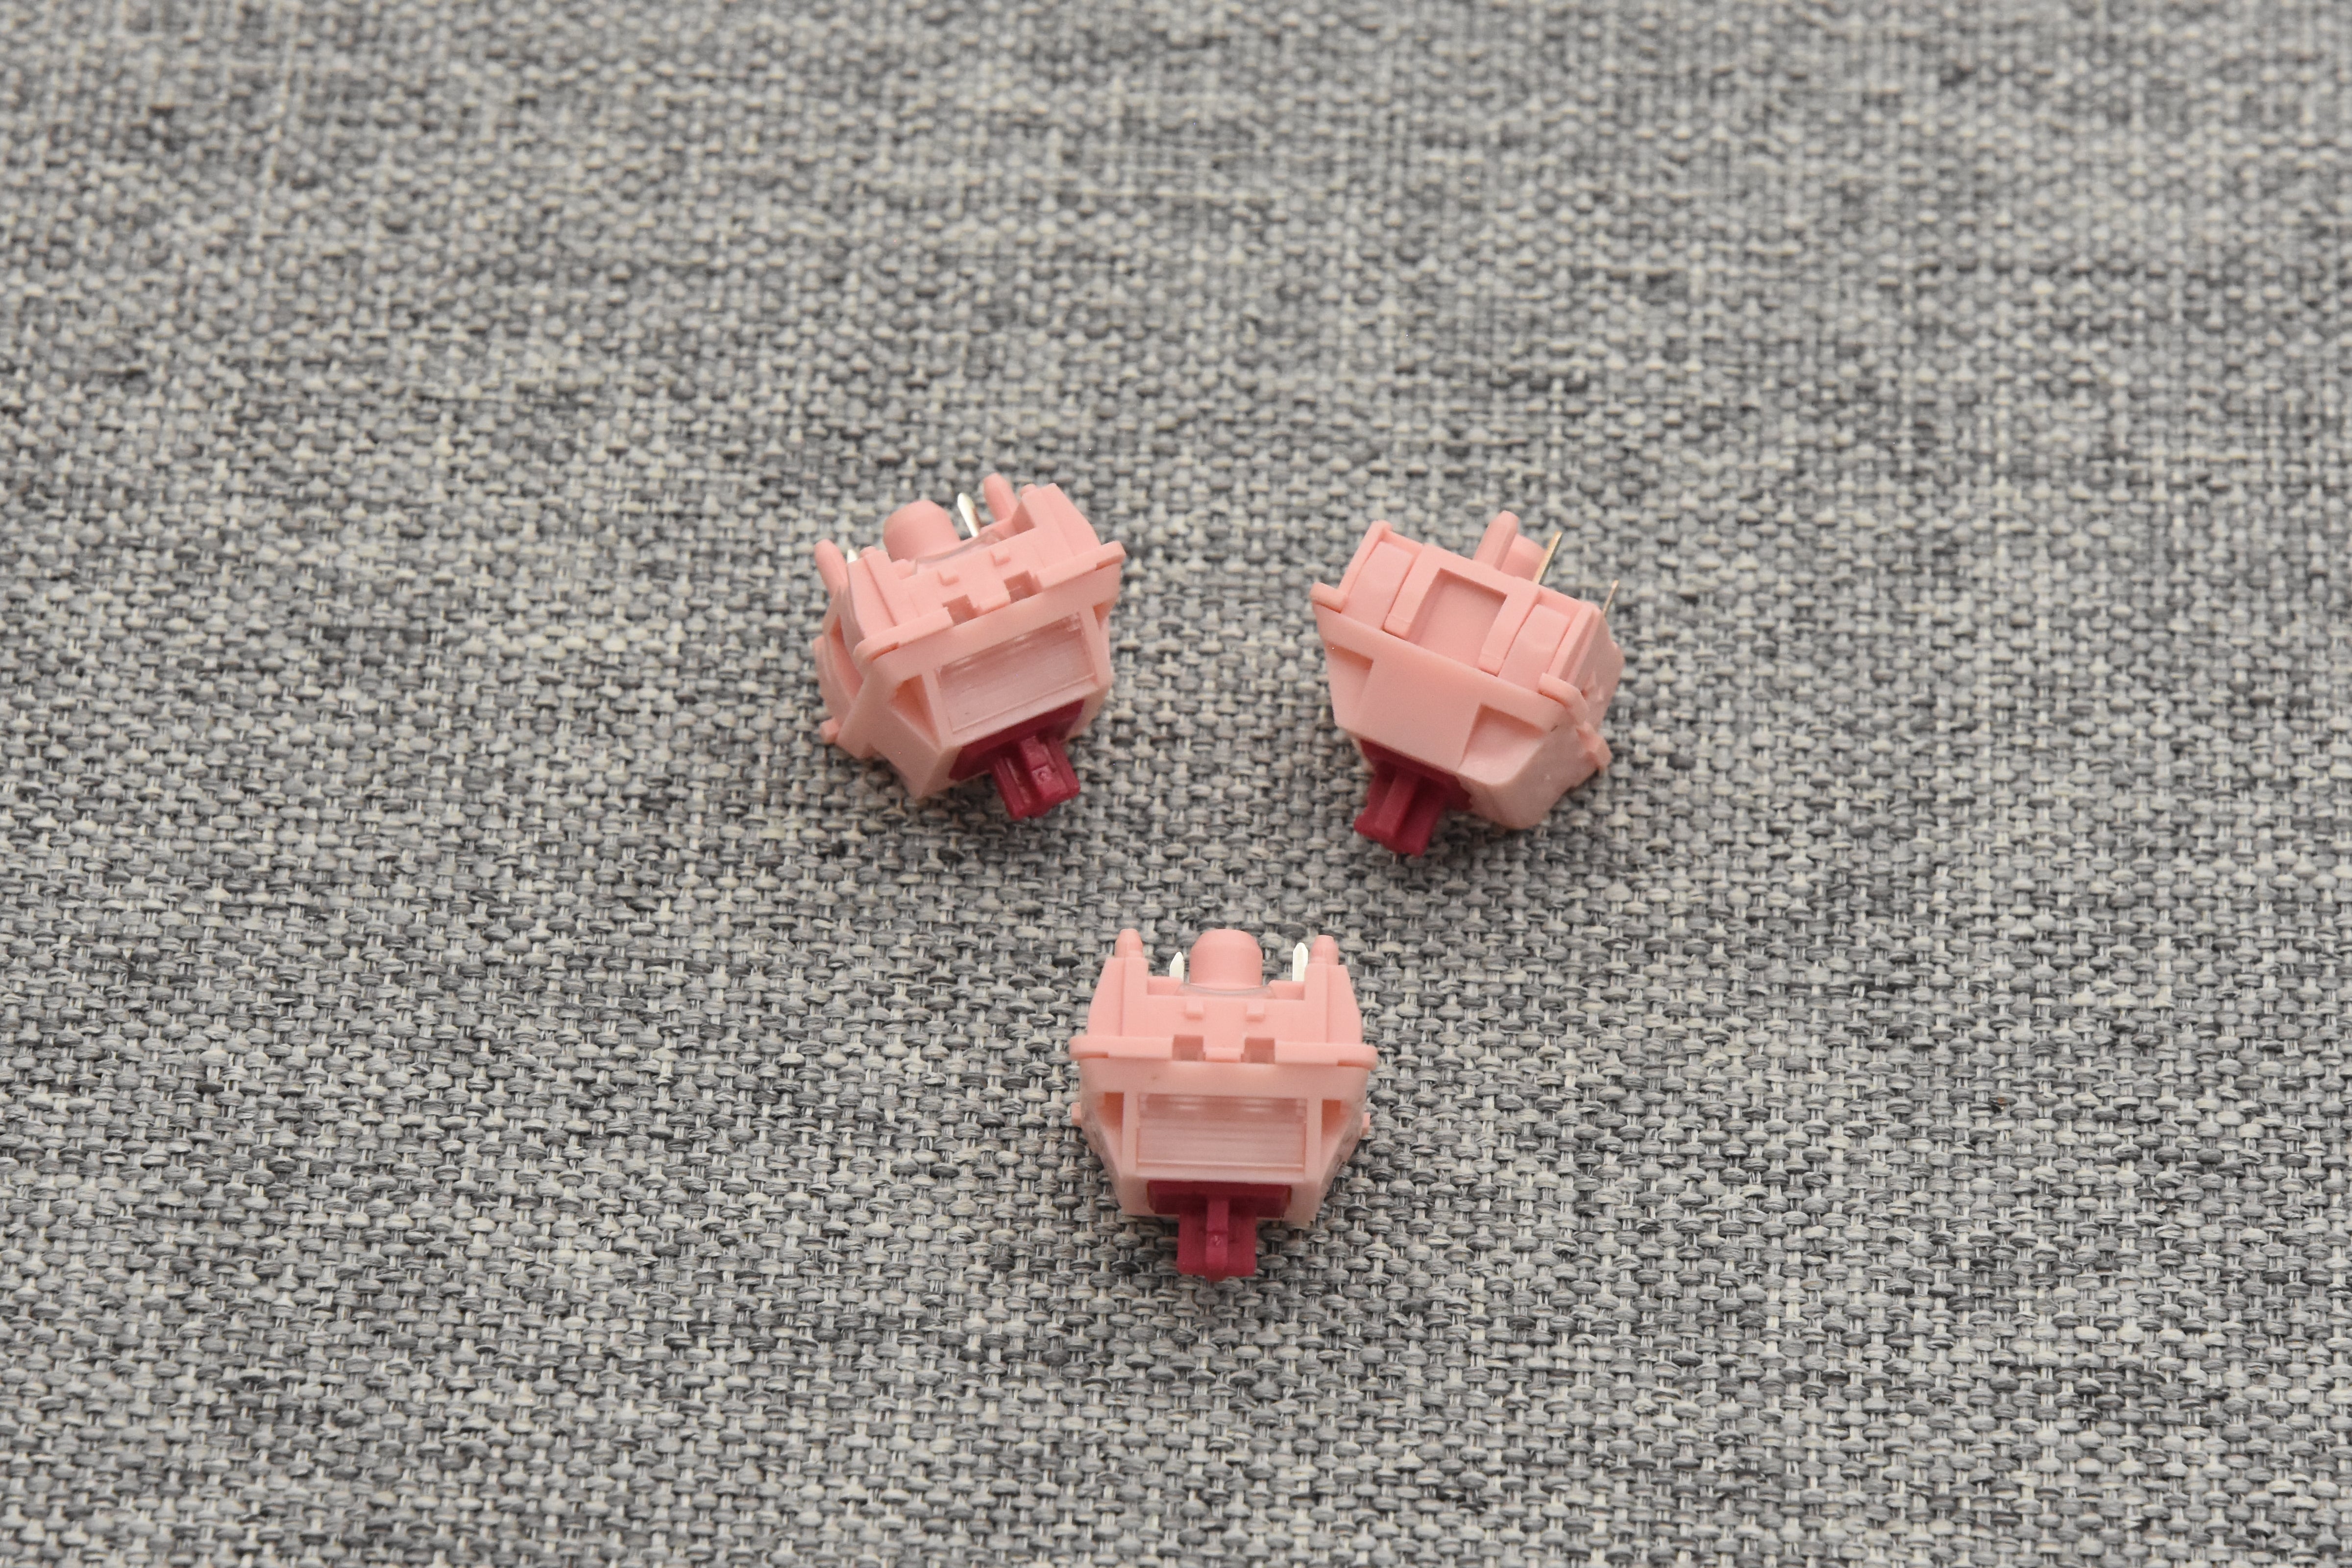 BSUN SAROKEYS STRAWBERRY WINE V2 LINEAR SWITCH FACTORY LUBED (10PCS)